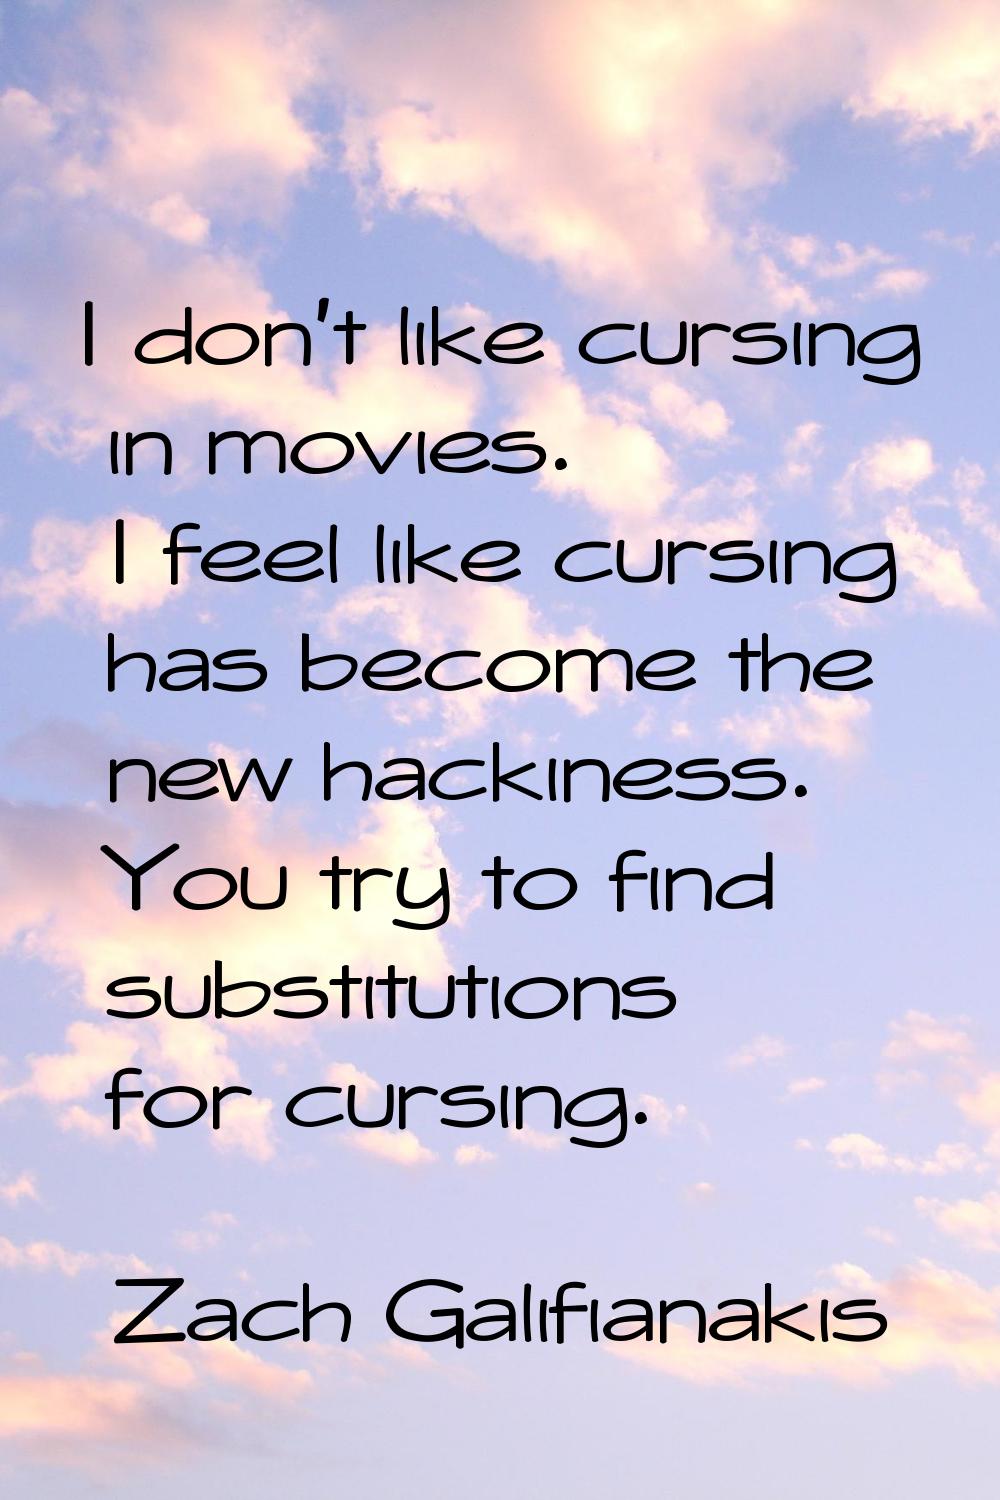 I don't like cursing in movies. I feel like cursing has become the new hackiness. You try to find s